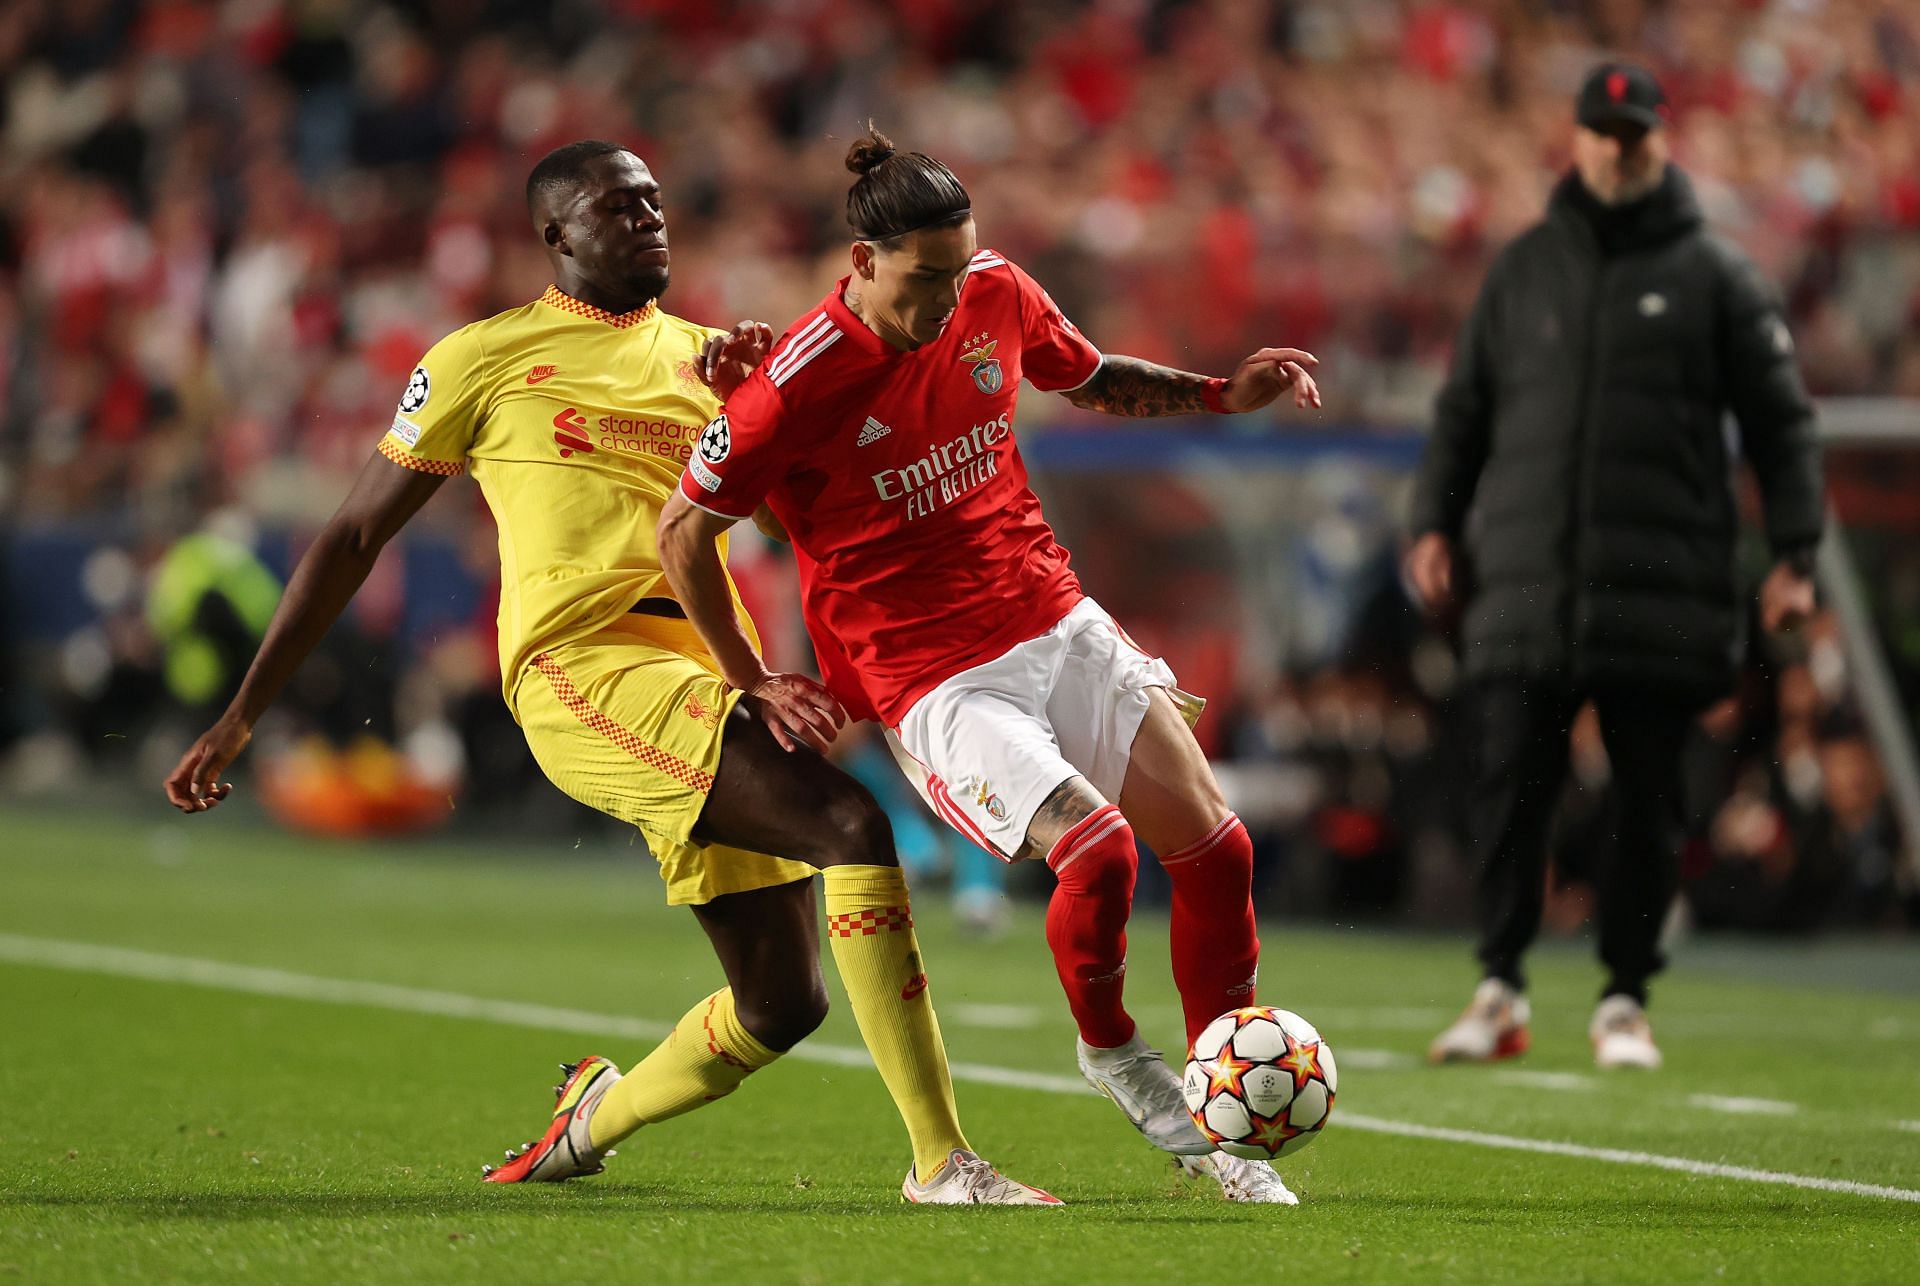 Nunez faced the Reds in the Champions League last season